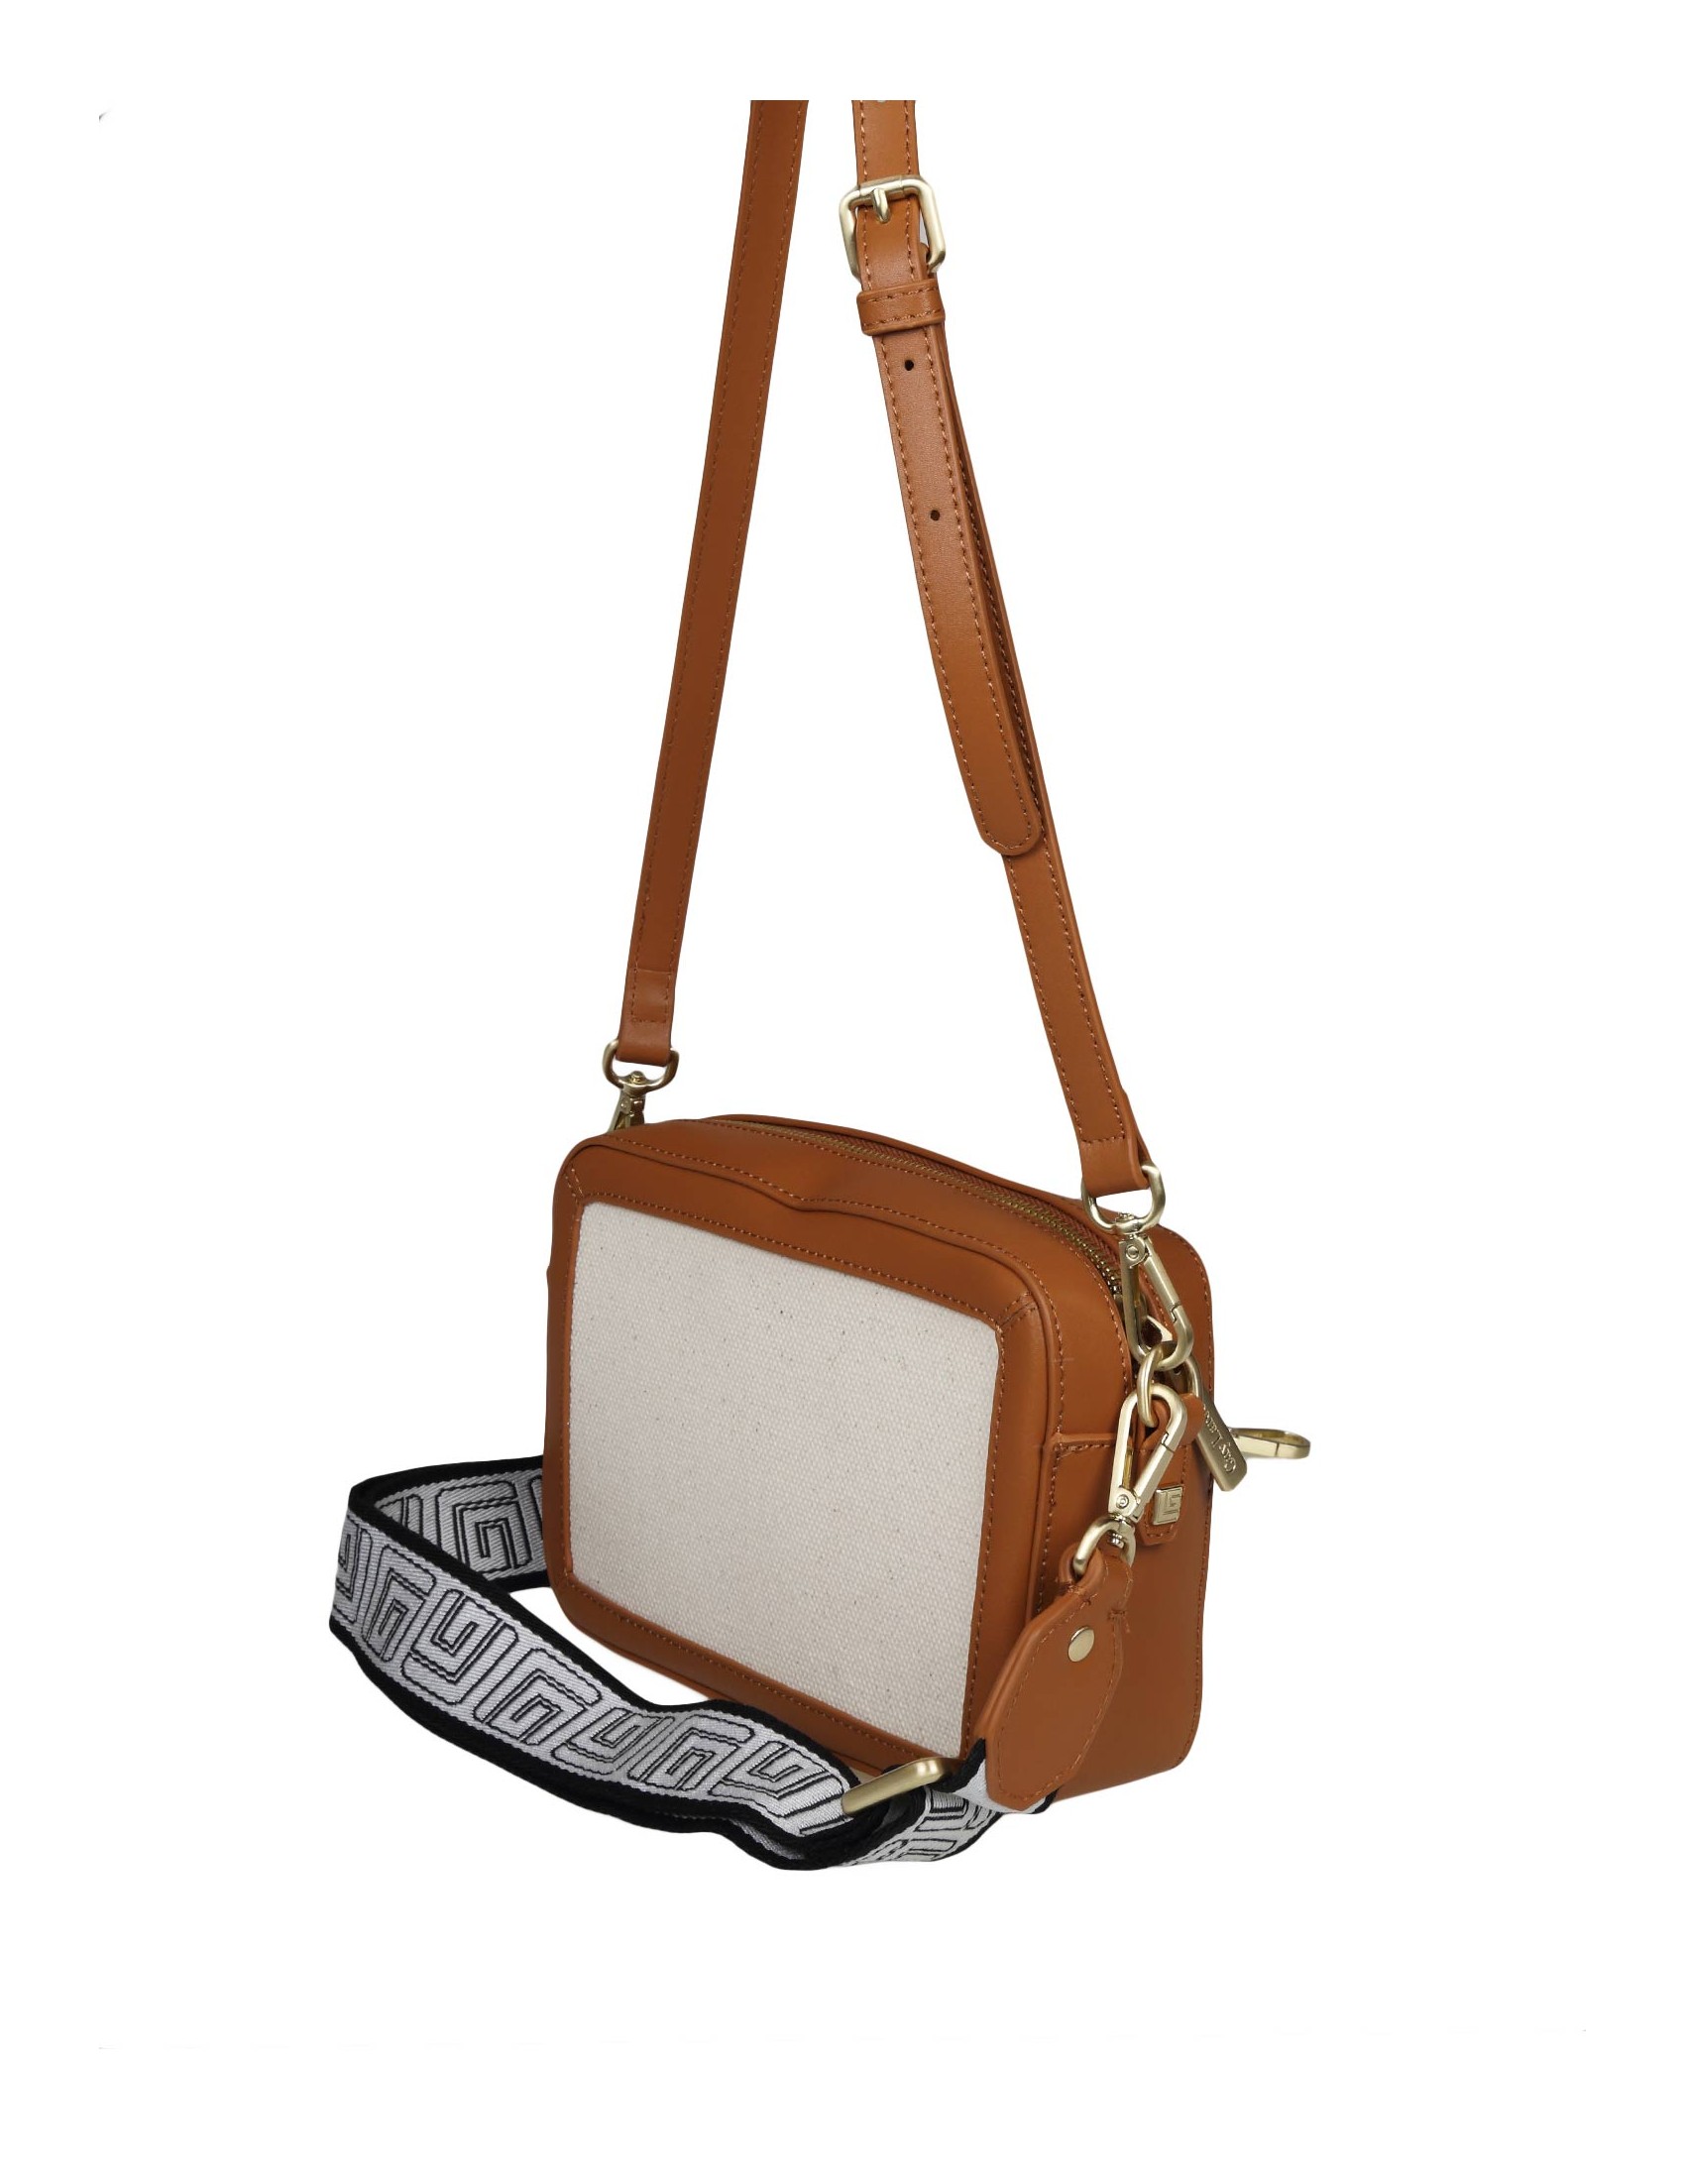 GUY LAROCHE CAMERA BAG IN CANVAS AND LEATHER